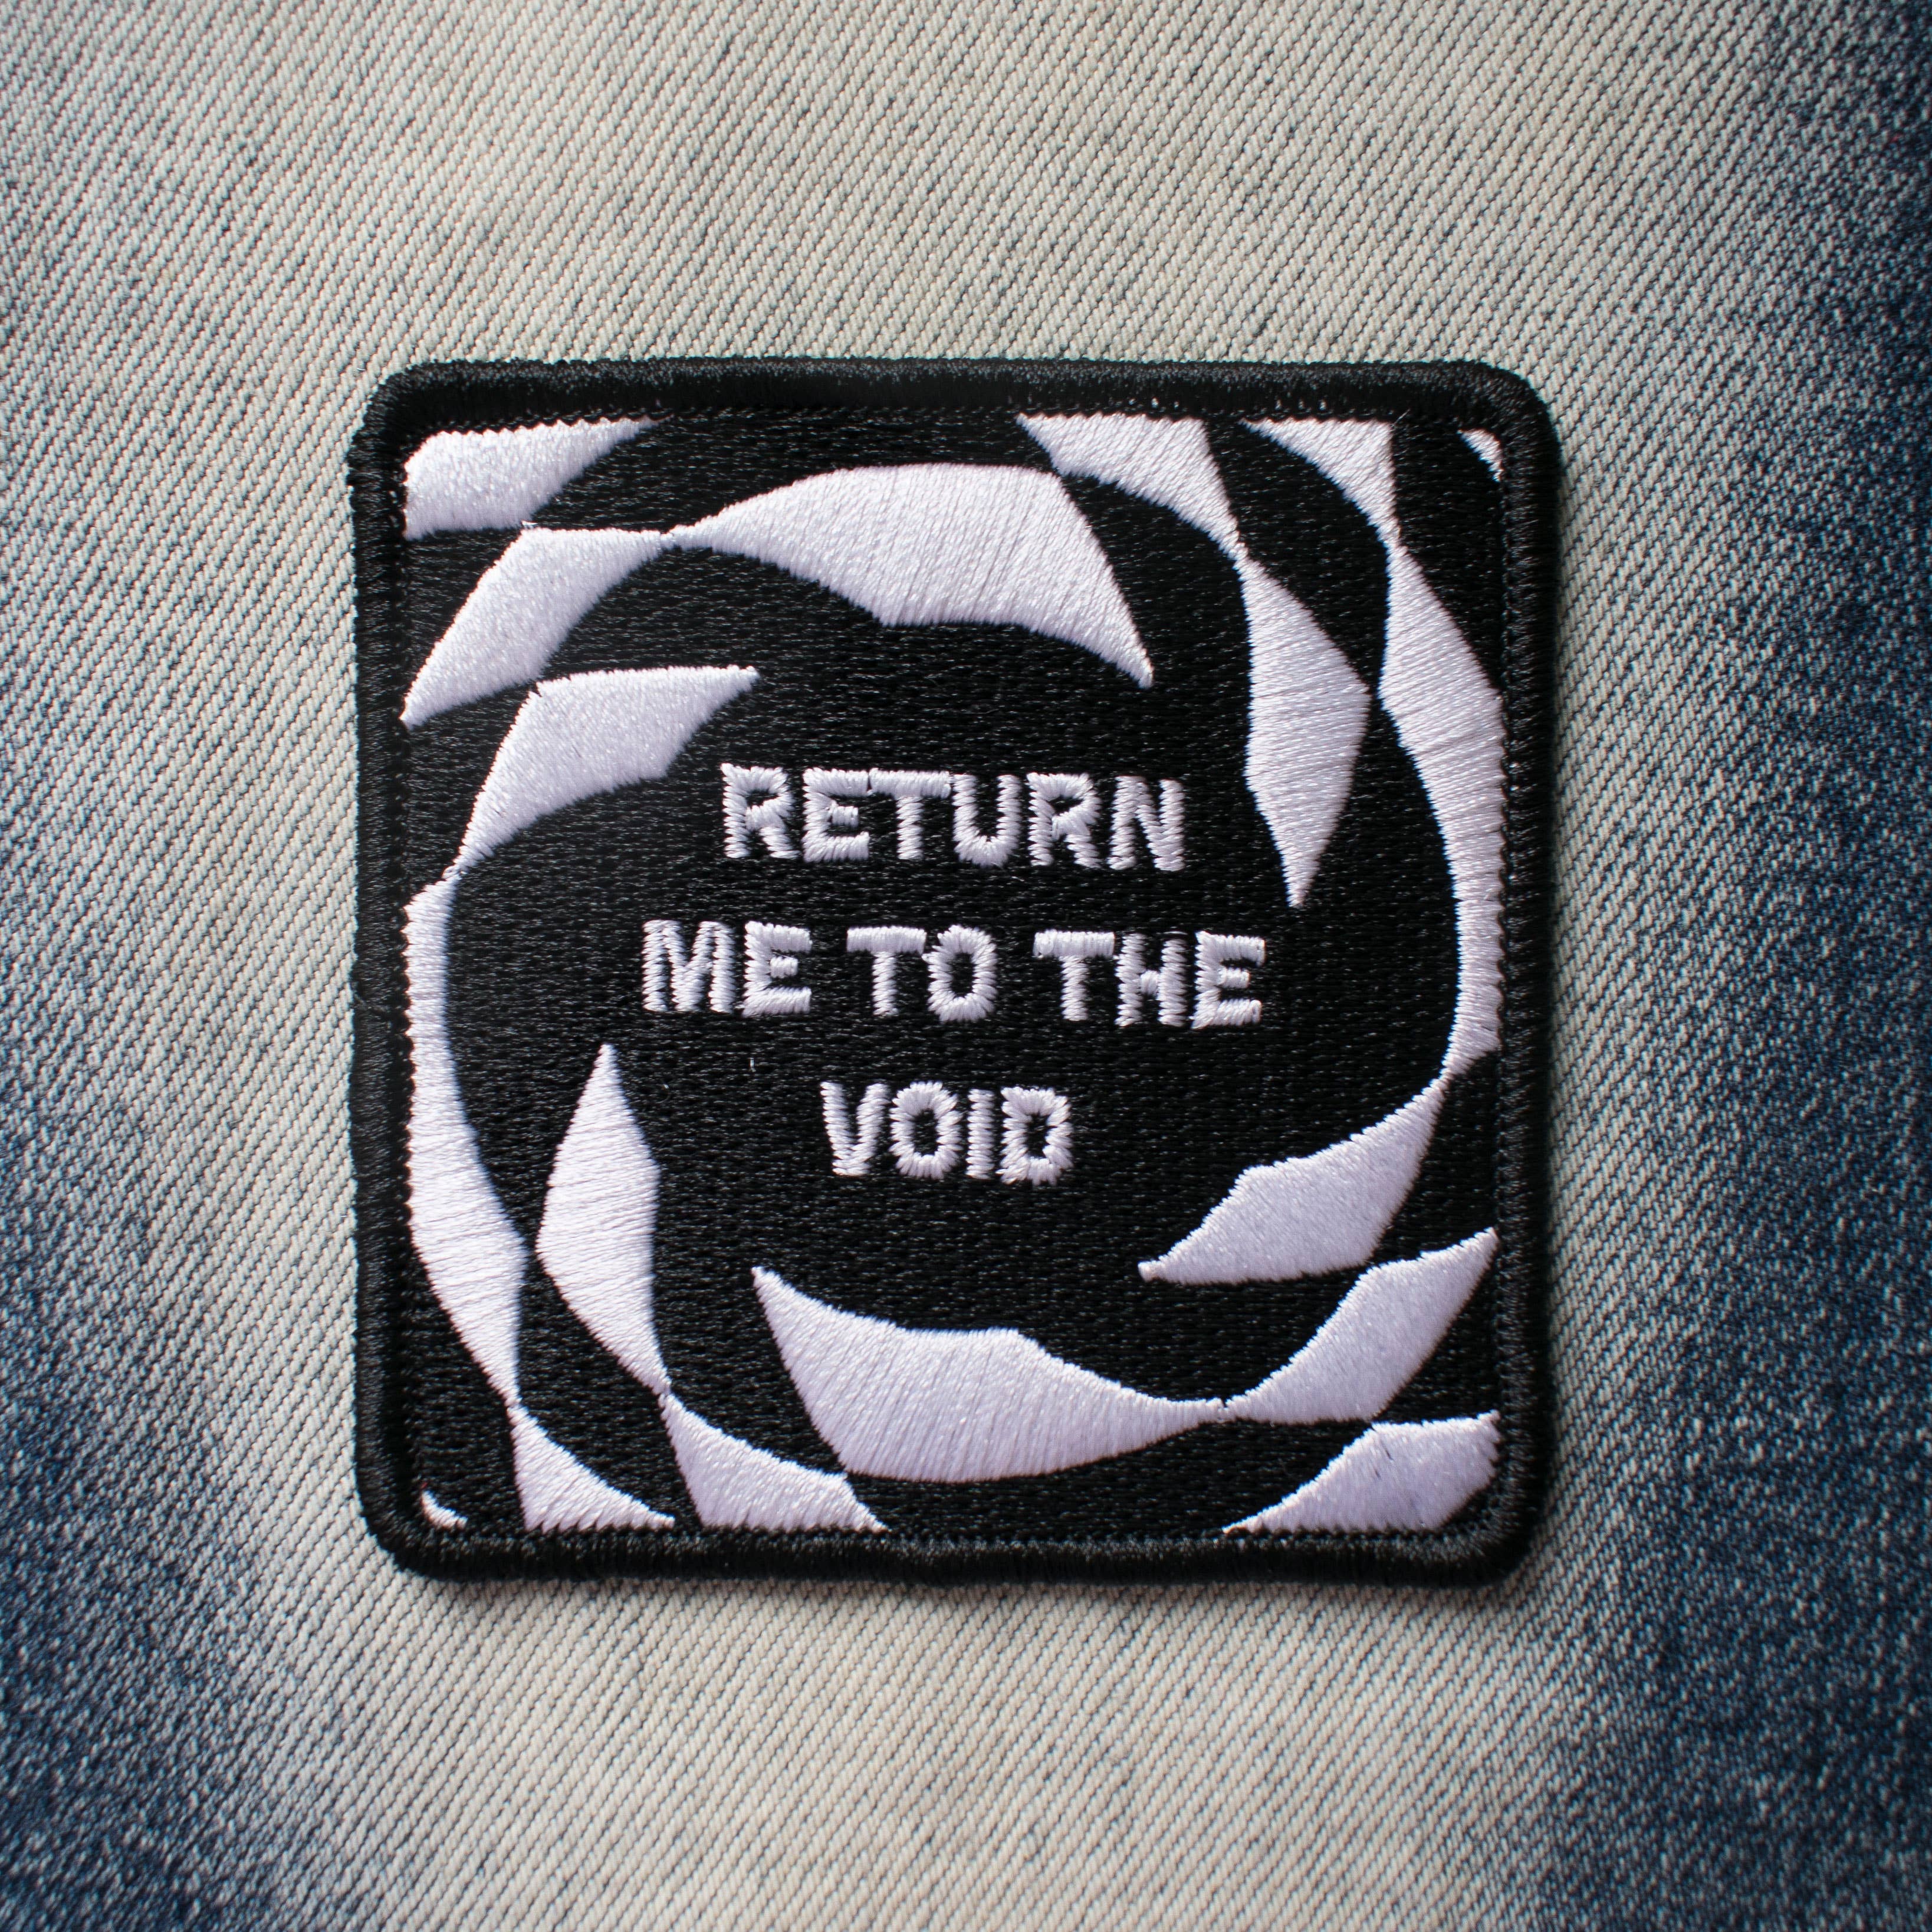 Return Me to the Void Embroidered Patch